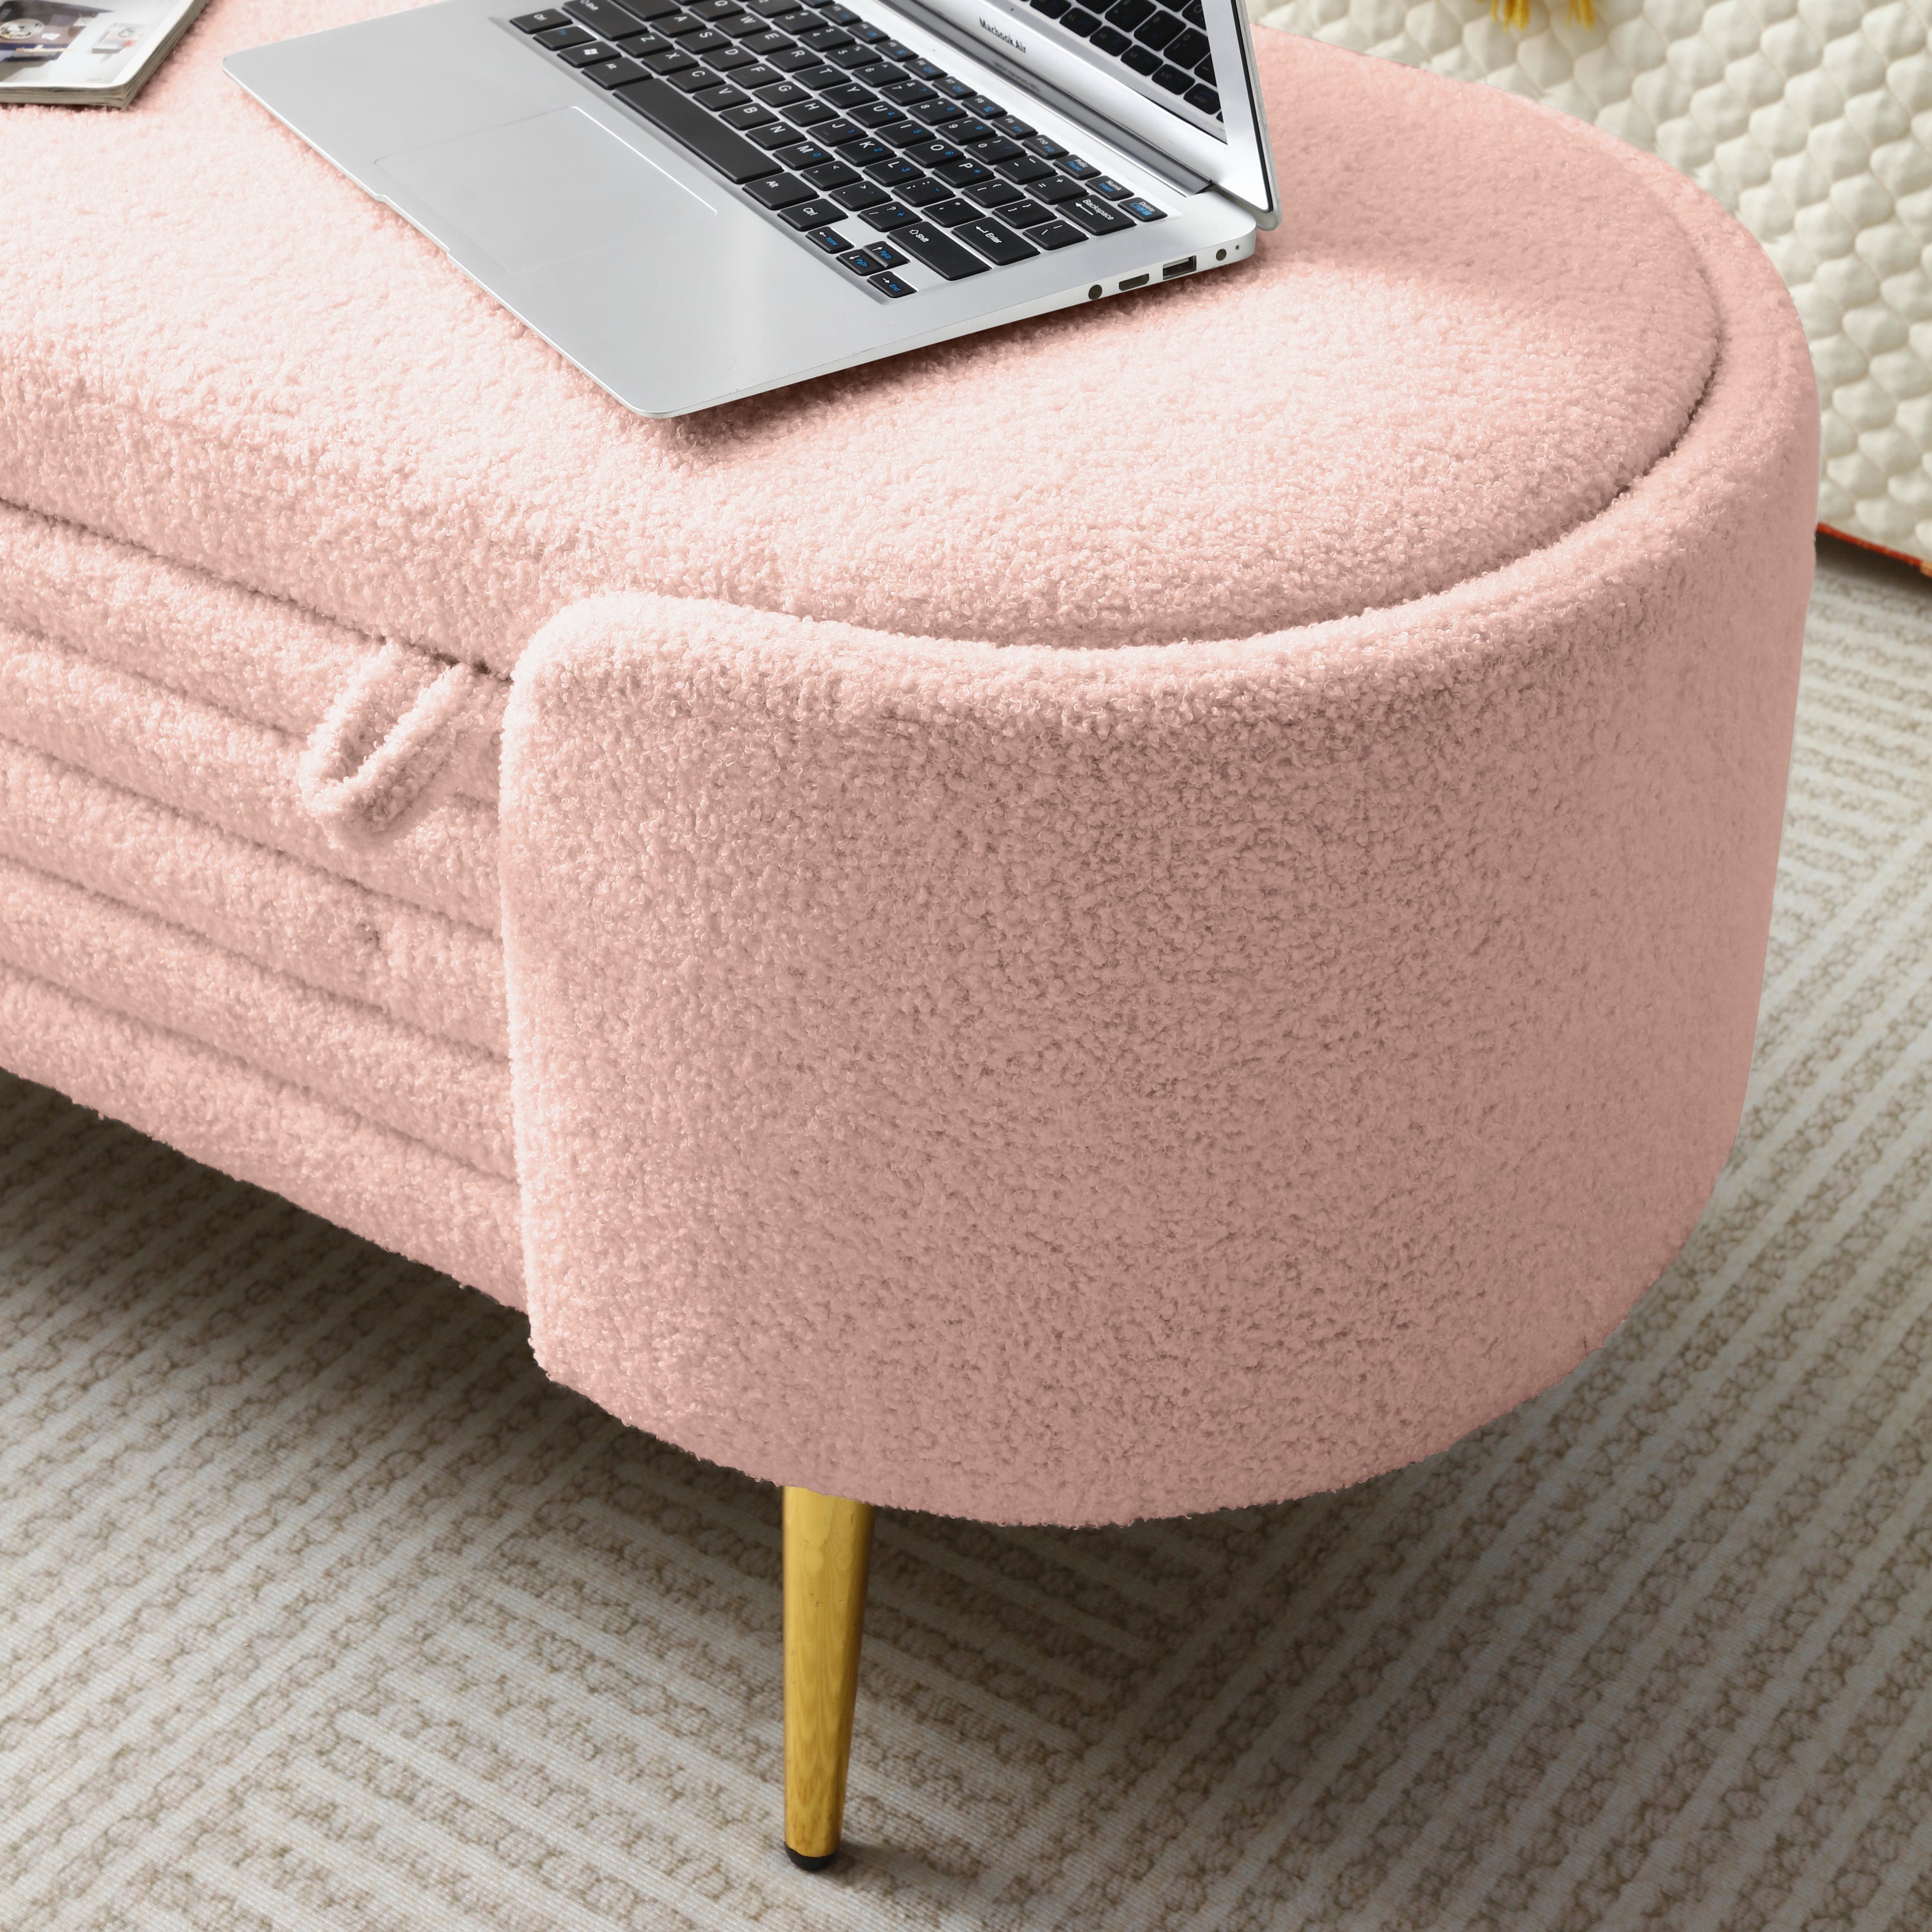 NOBLEMOOD End of Bed Bench with Storage Upholstered Sherpa Fabric Large Storage Bench Ottoman Shoe Stool Long Bench Window Sitting Toy Storage Bench for Bedroom,Living Room,Entryway,Pink